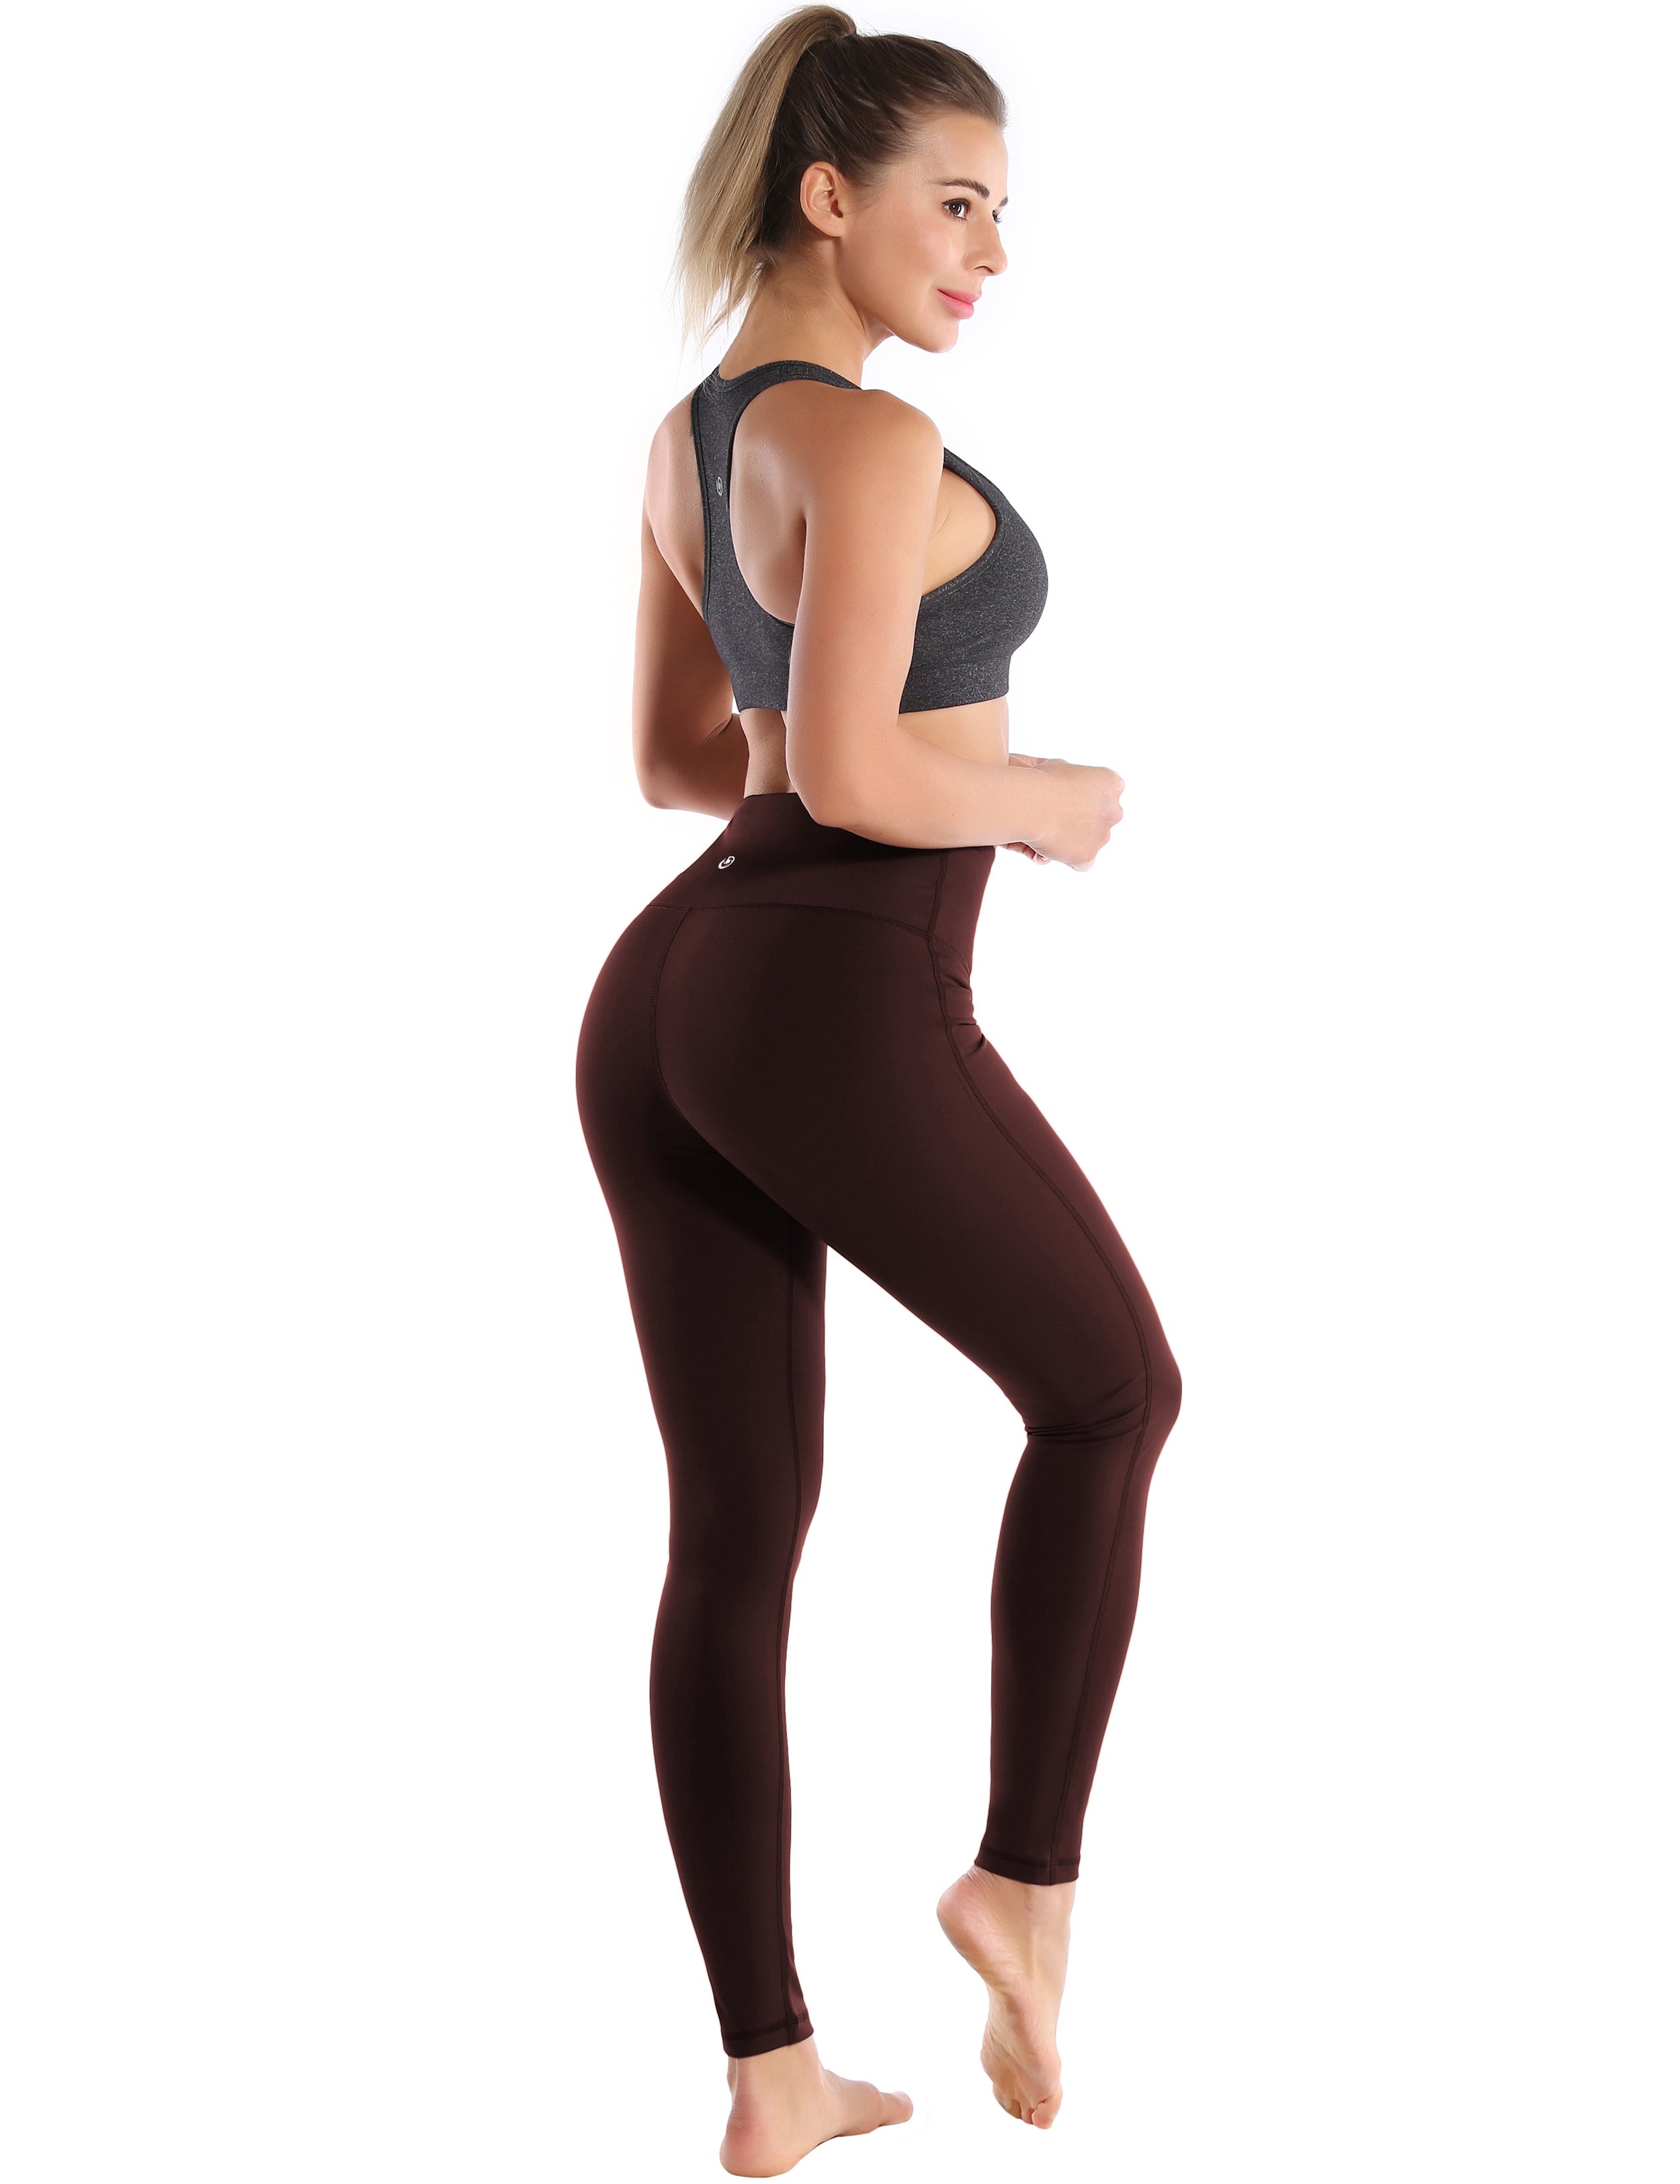 High Waist Side Line Pilates Pants mahoganymaroon Side Line is Make Your Legs Look Longer and Thinner 75%Nylon/25%Spandex Fabric doesn't attract lint easily 4-way stretch No see-through Moisture-wicking Tummy control Inner pocket Two lengths